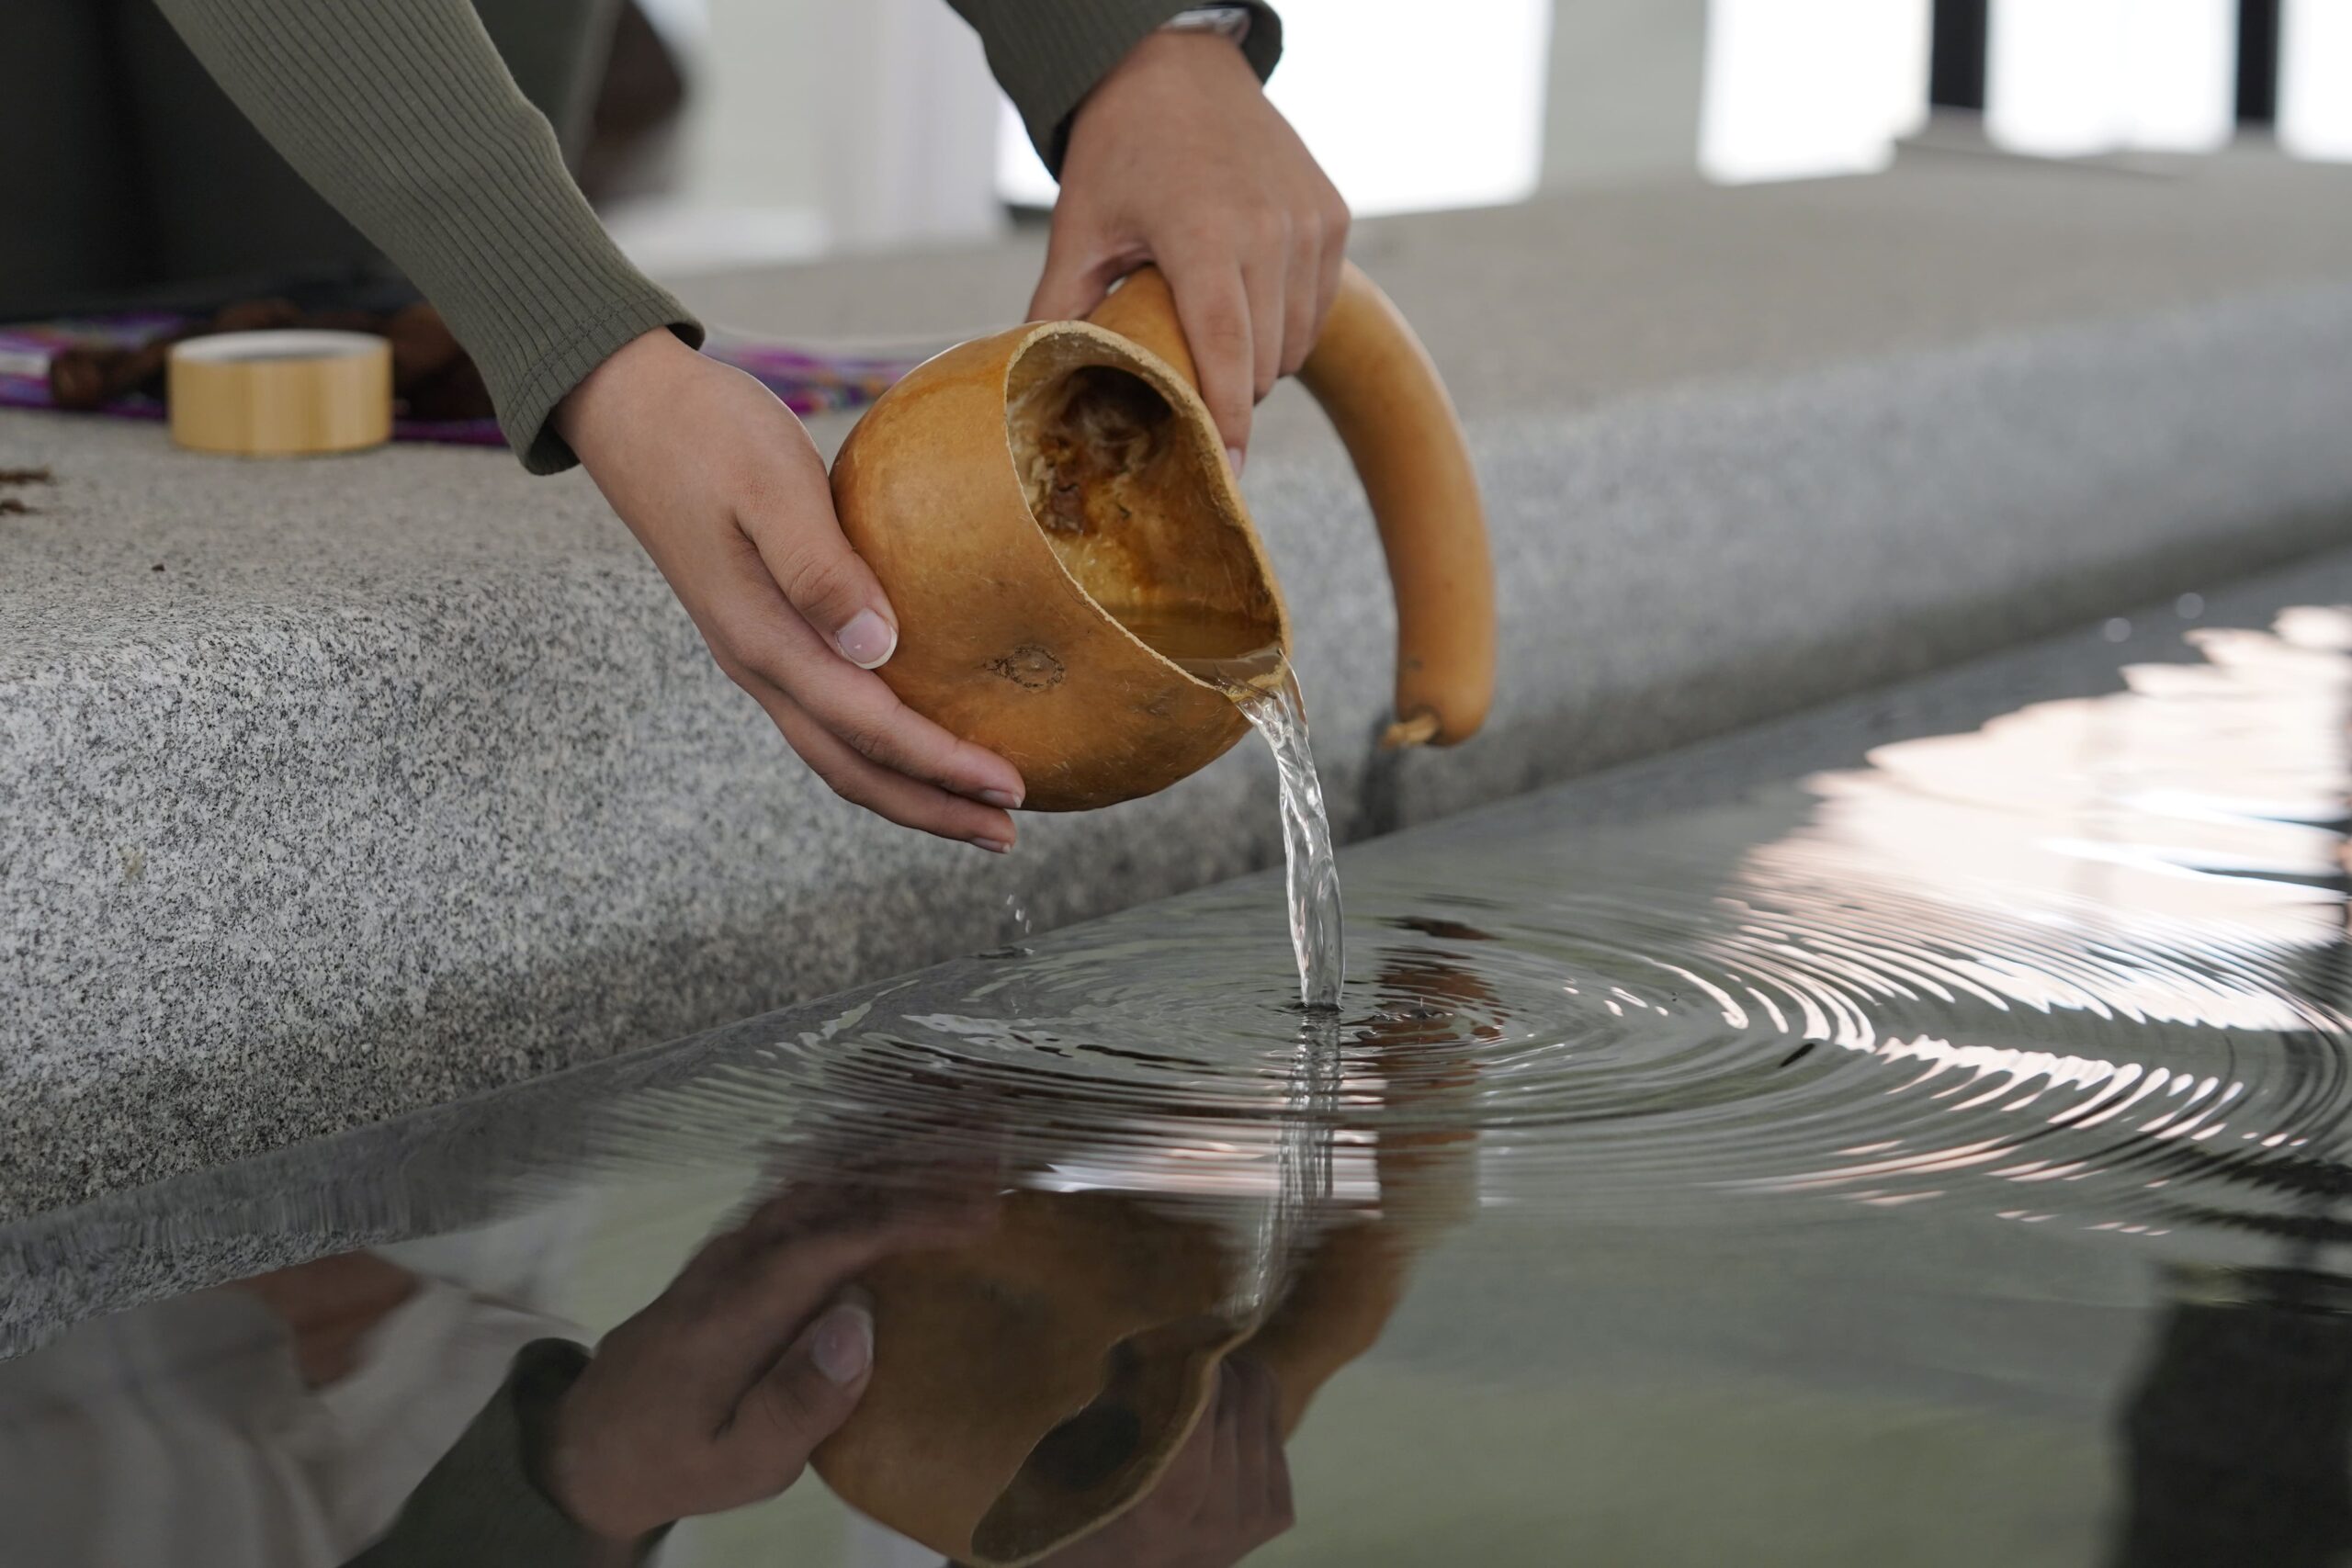 Professor Gabrielle Tayac pours water from the Potomac into the Wilkins Plaza<br />
fountain, which contains stones in a pattern that symbolize an African custom of gathering<br />
and prayer, in a ceremony acknowledging that the land on which the university was built<br />
was originally inhabited by indigenous people.